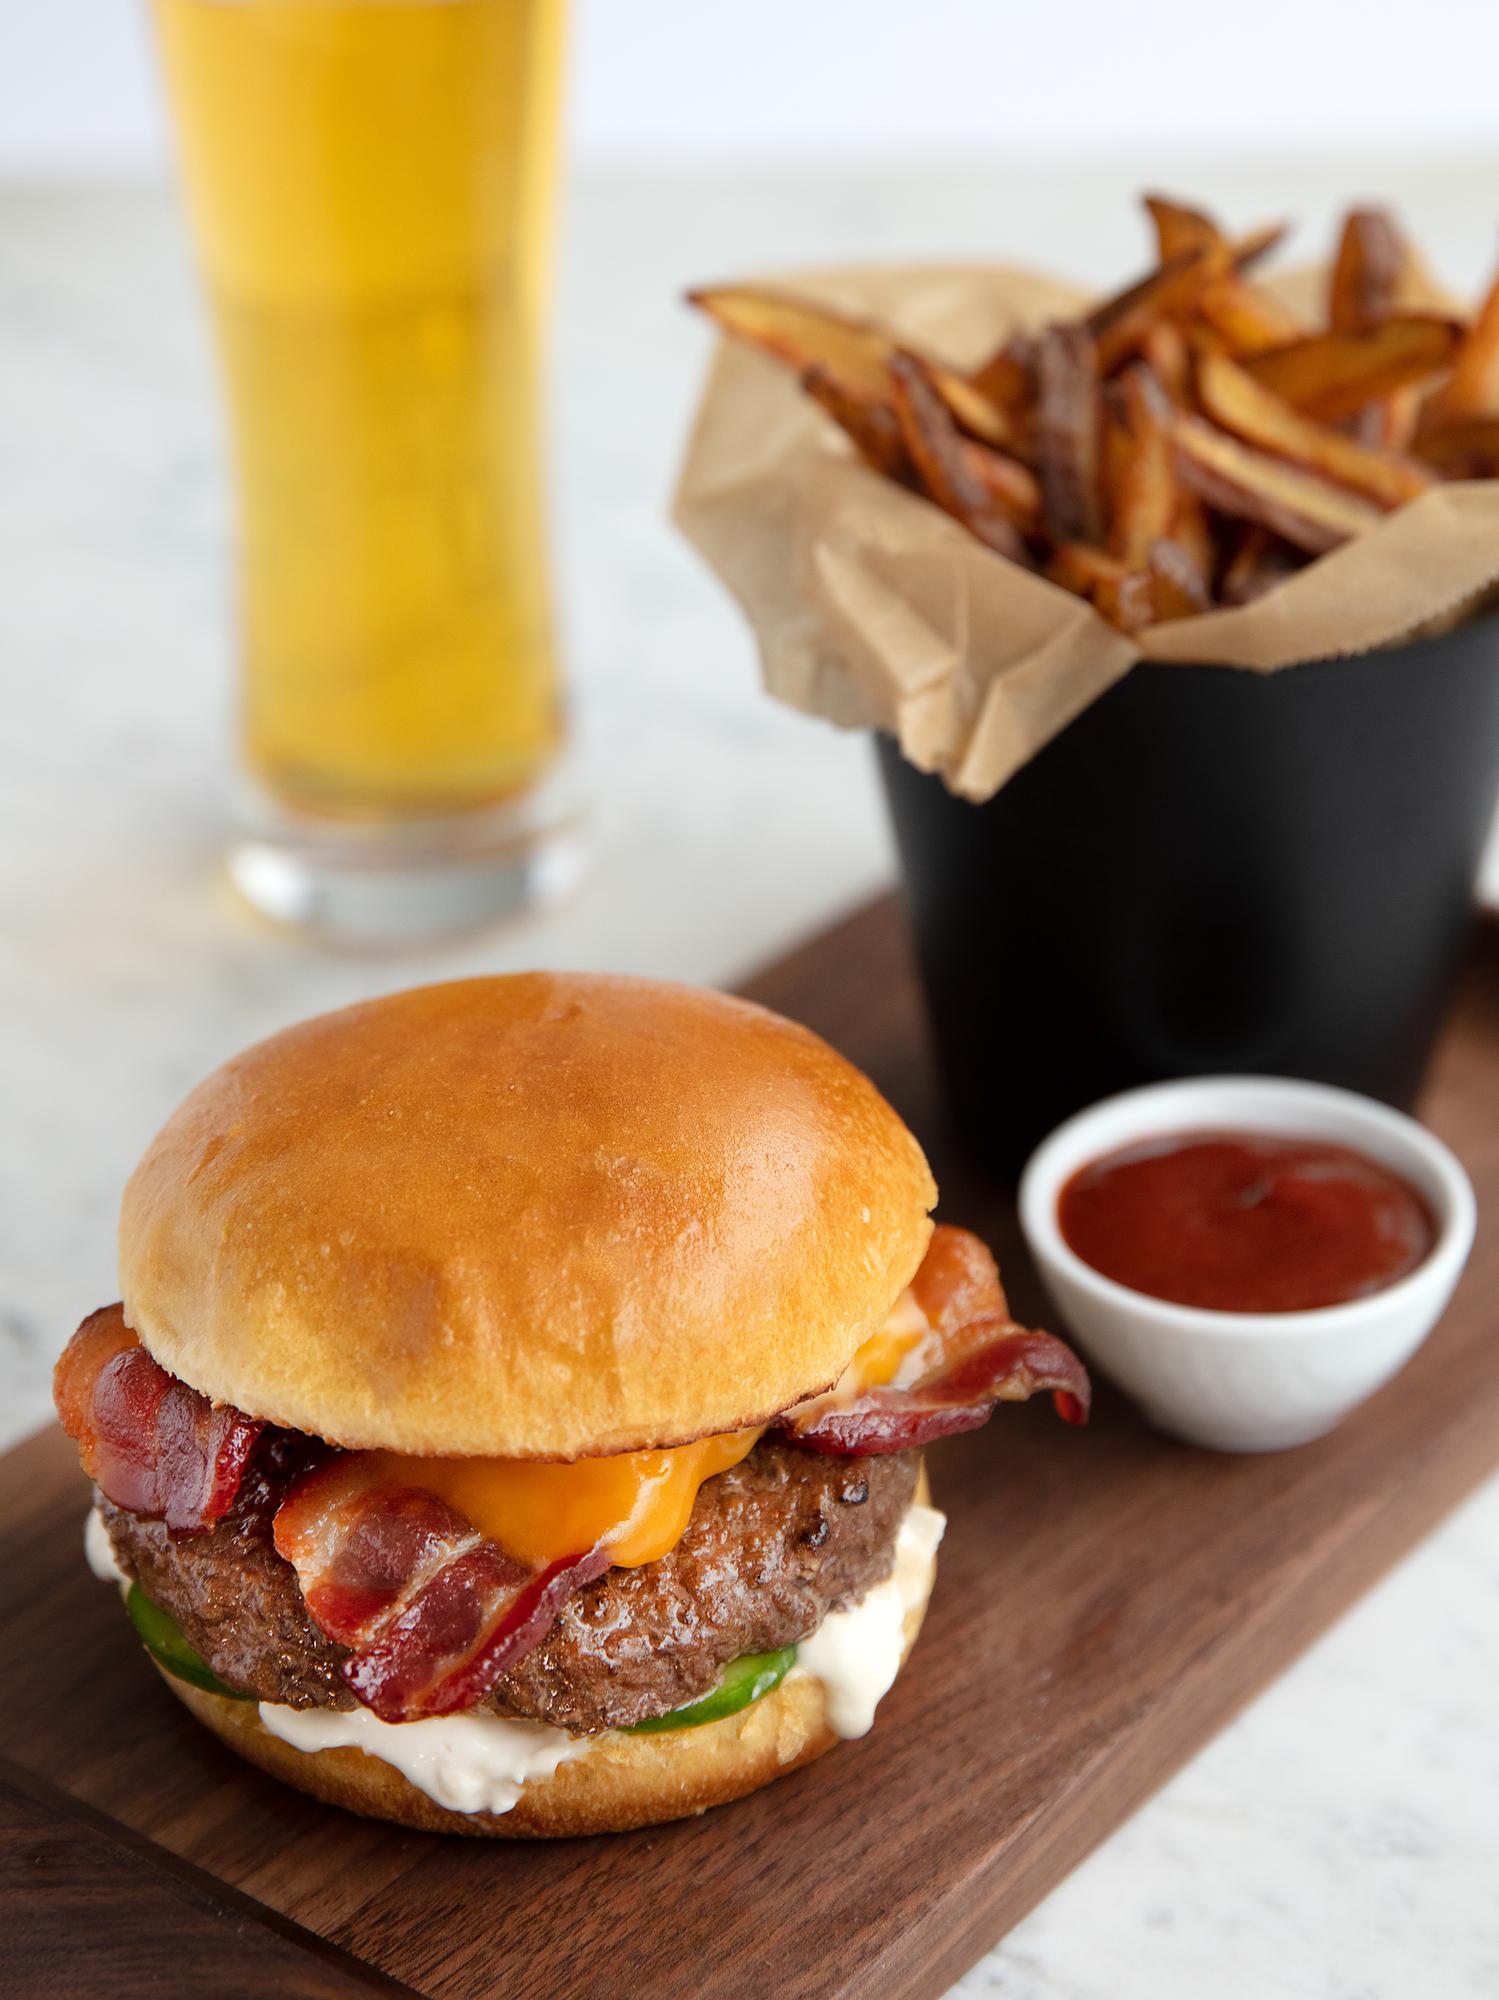 a burger with bacon and cheese on a wooden board next to a cup of beer